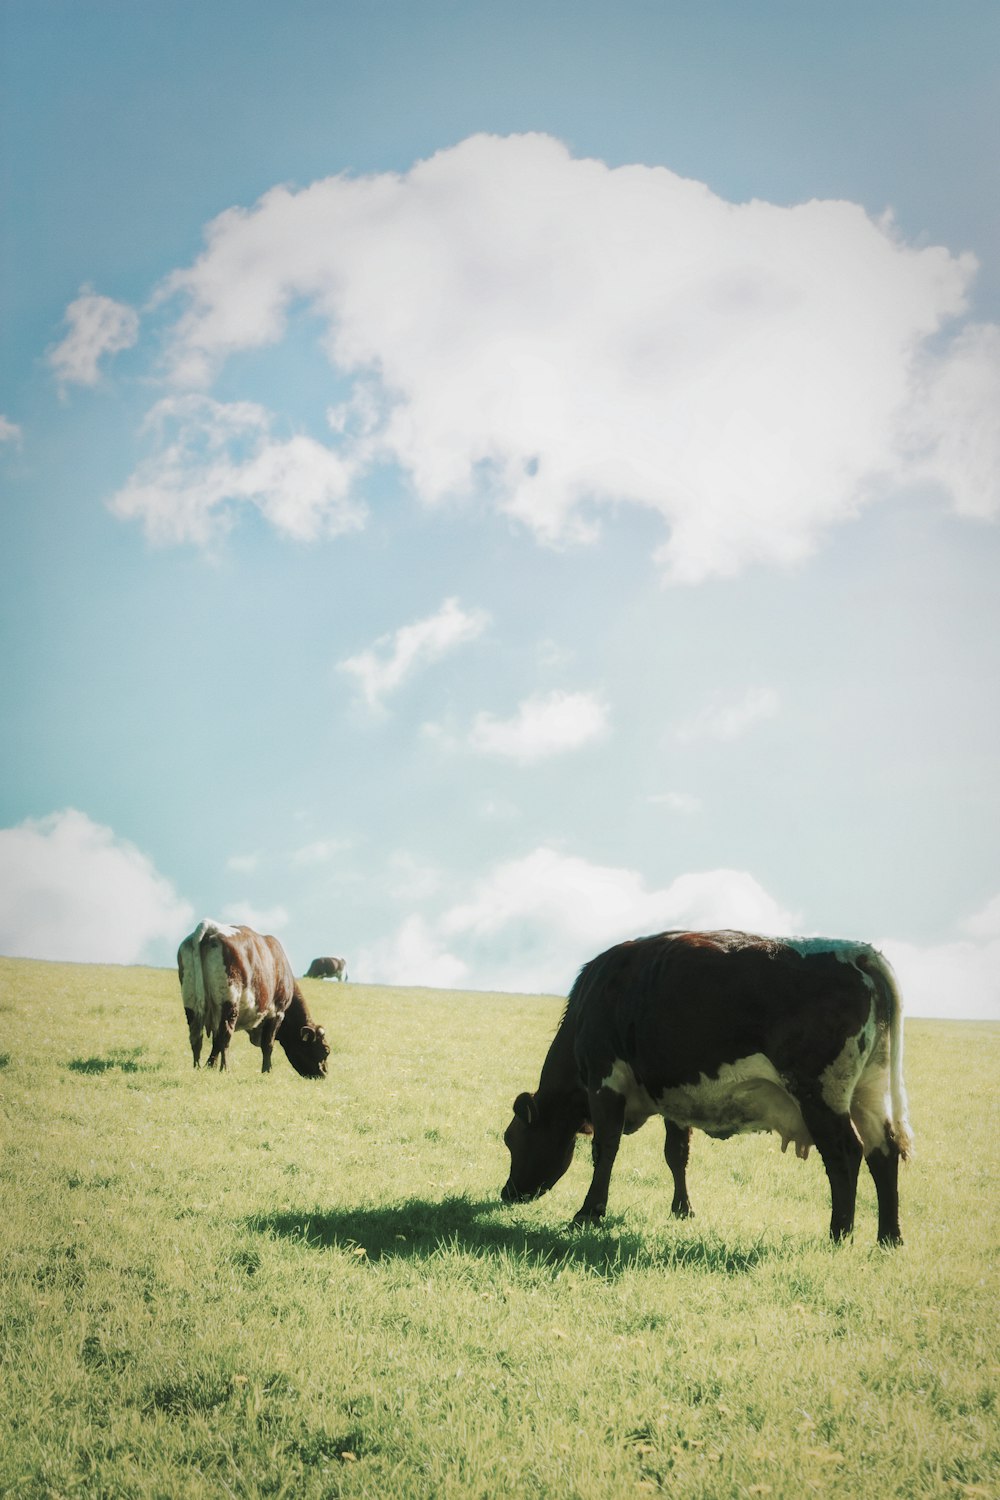 herd of cows on green grass field under white clouds and blue sky during daytime